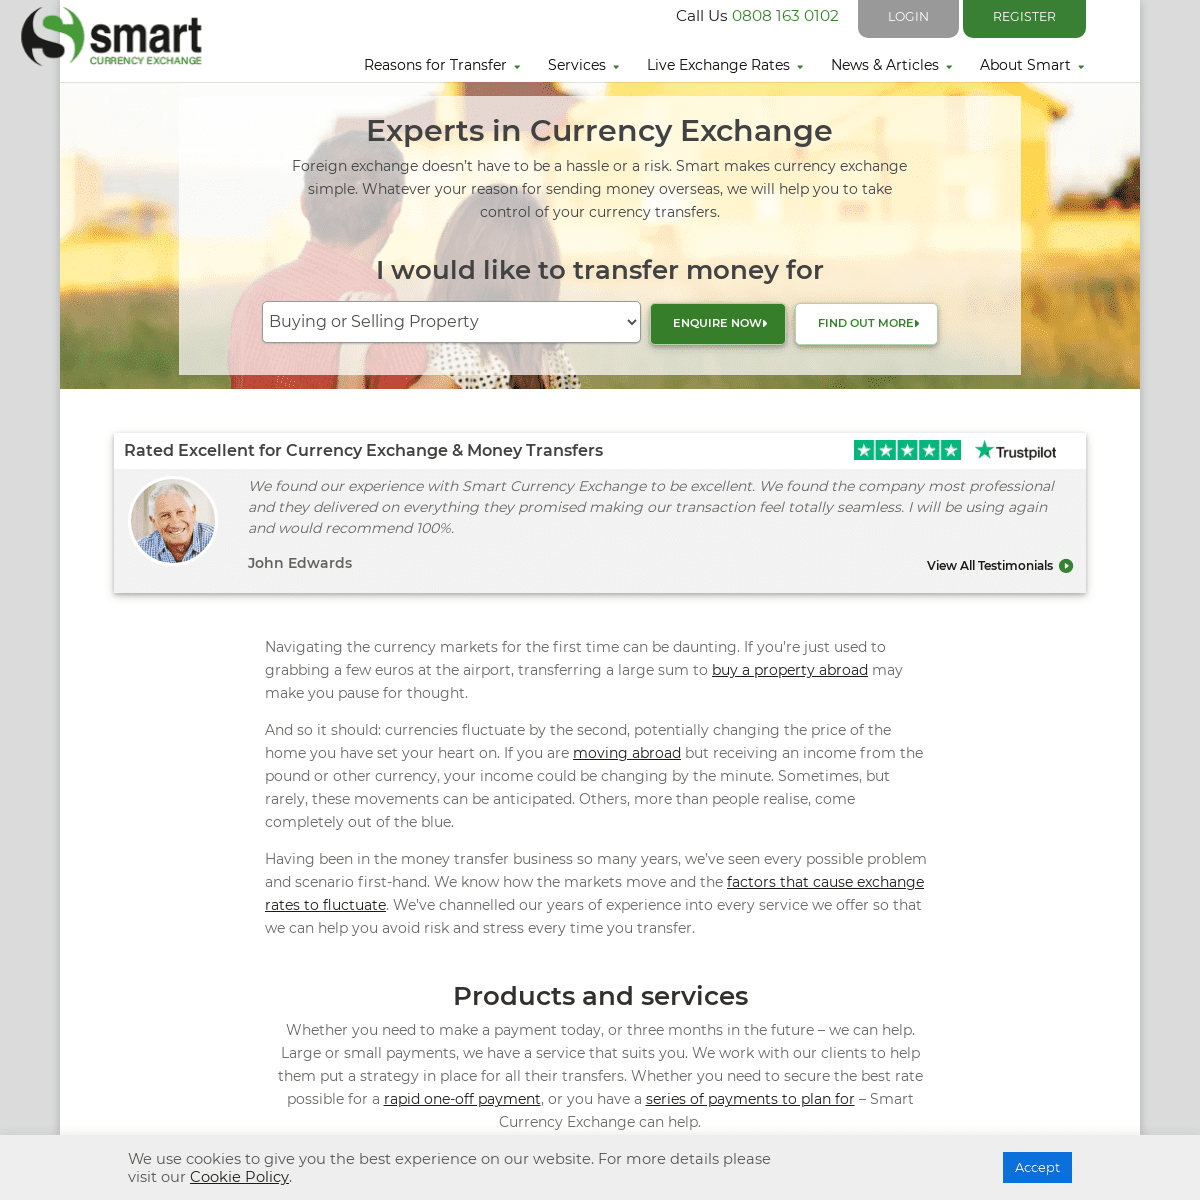 A complete backup of https://smartcurrencyexchange.com